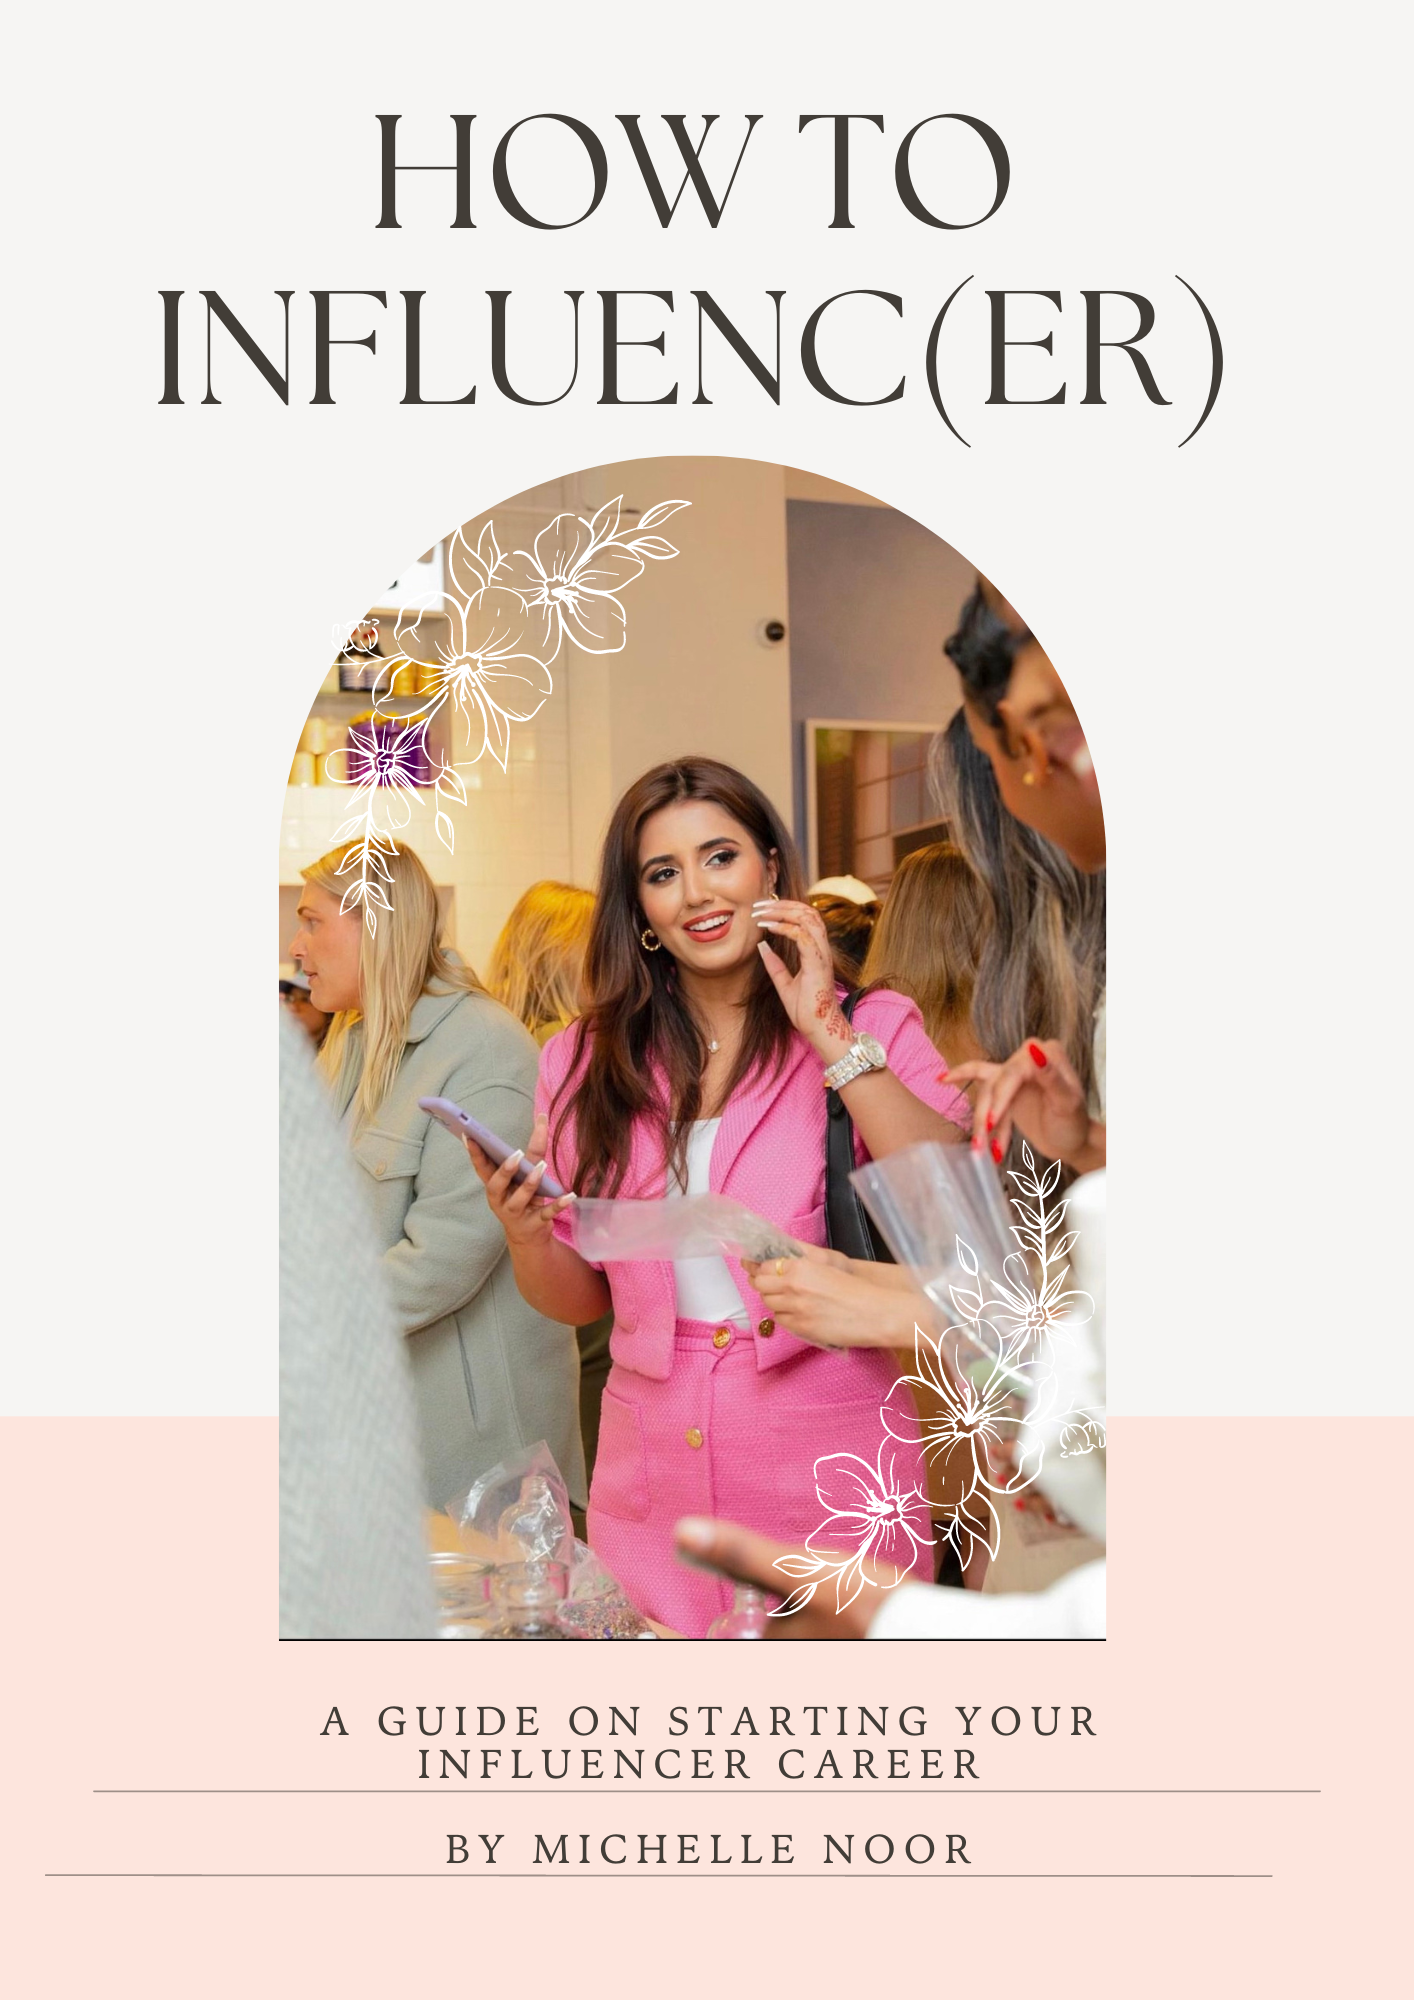 How to Influenc(ER) by Michelle Noor